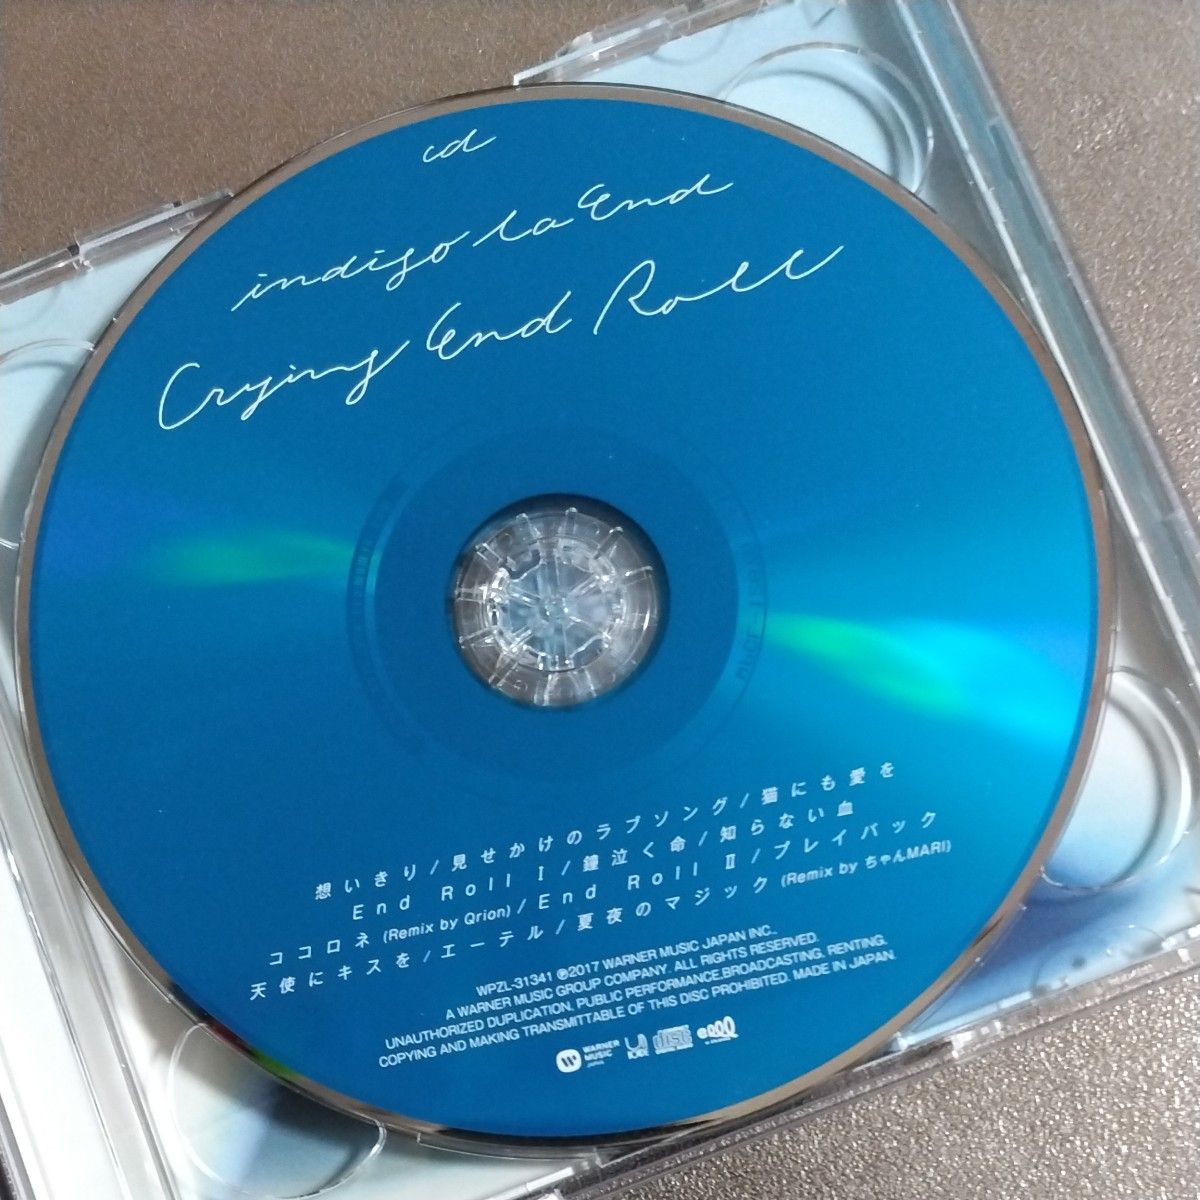 Crying End Roll [初回盤]　CD + DVD